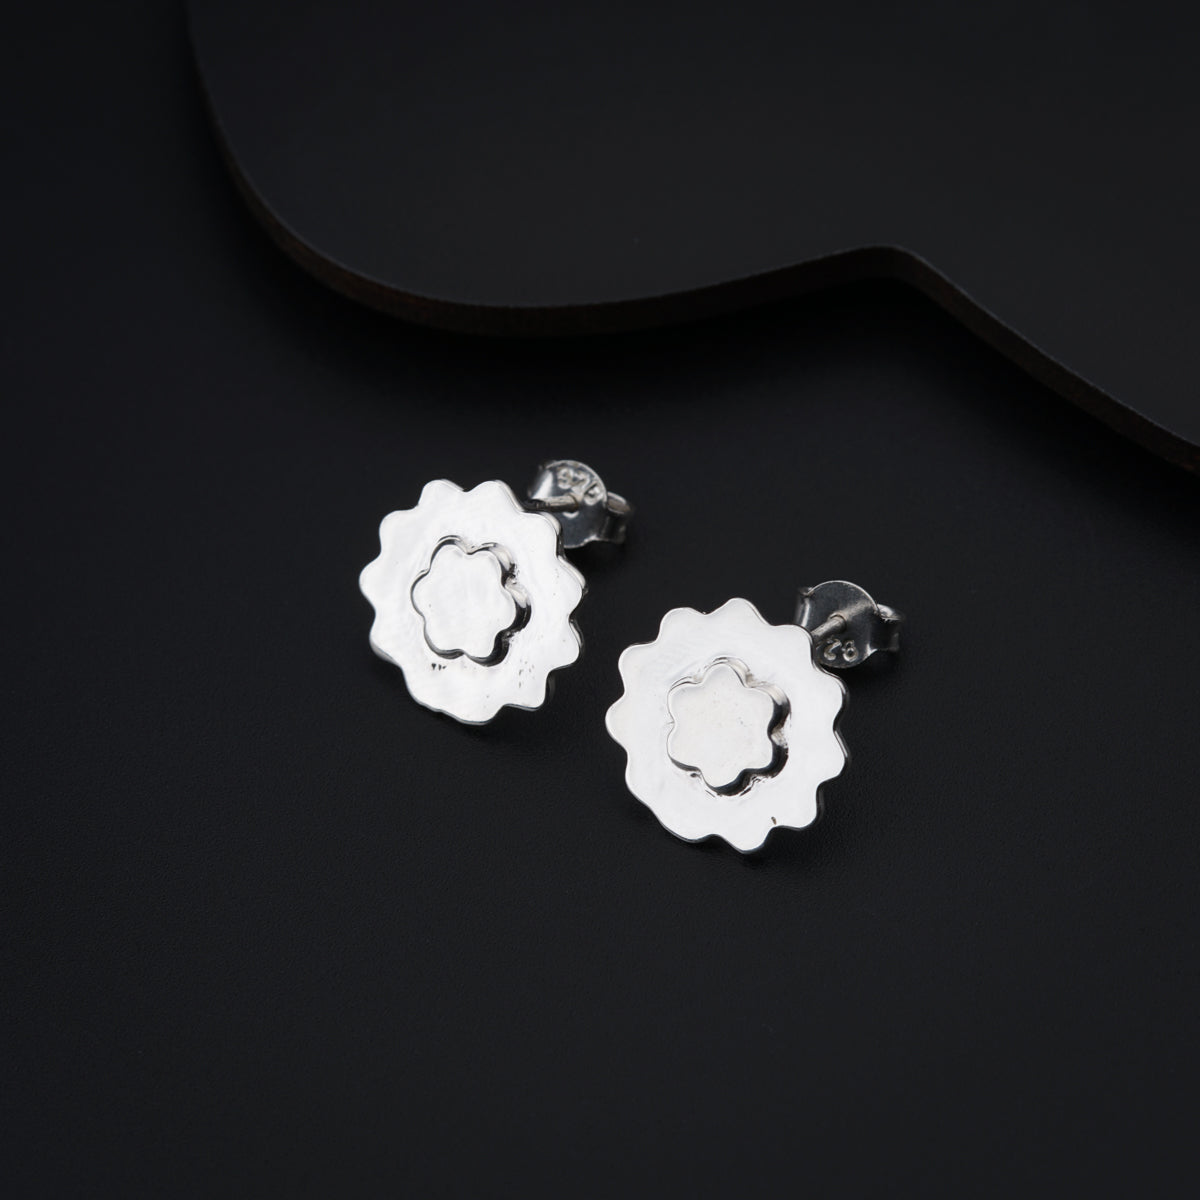 a pair of silver flower earrings on a black background